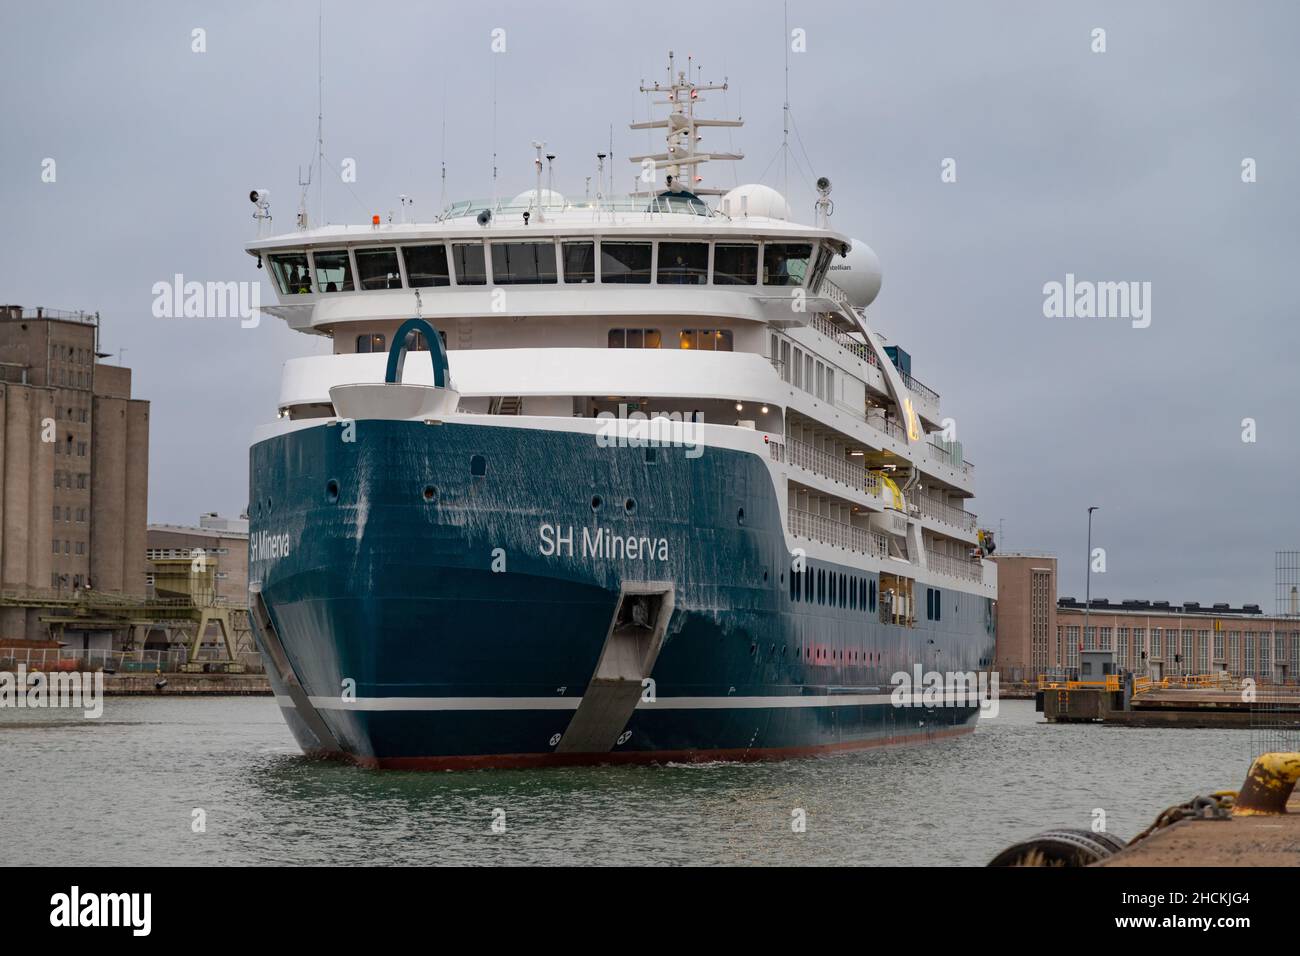 Swan Hellenic's new expedition cruise ship SH Minerva arriving back to Helsinki Shipyard after sea trials. Stock Photo